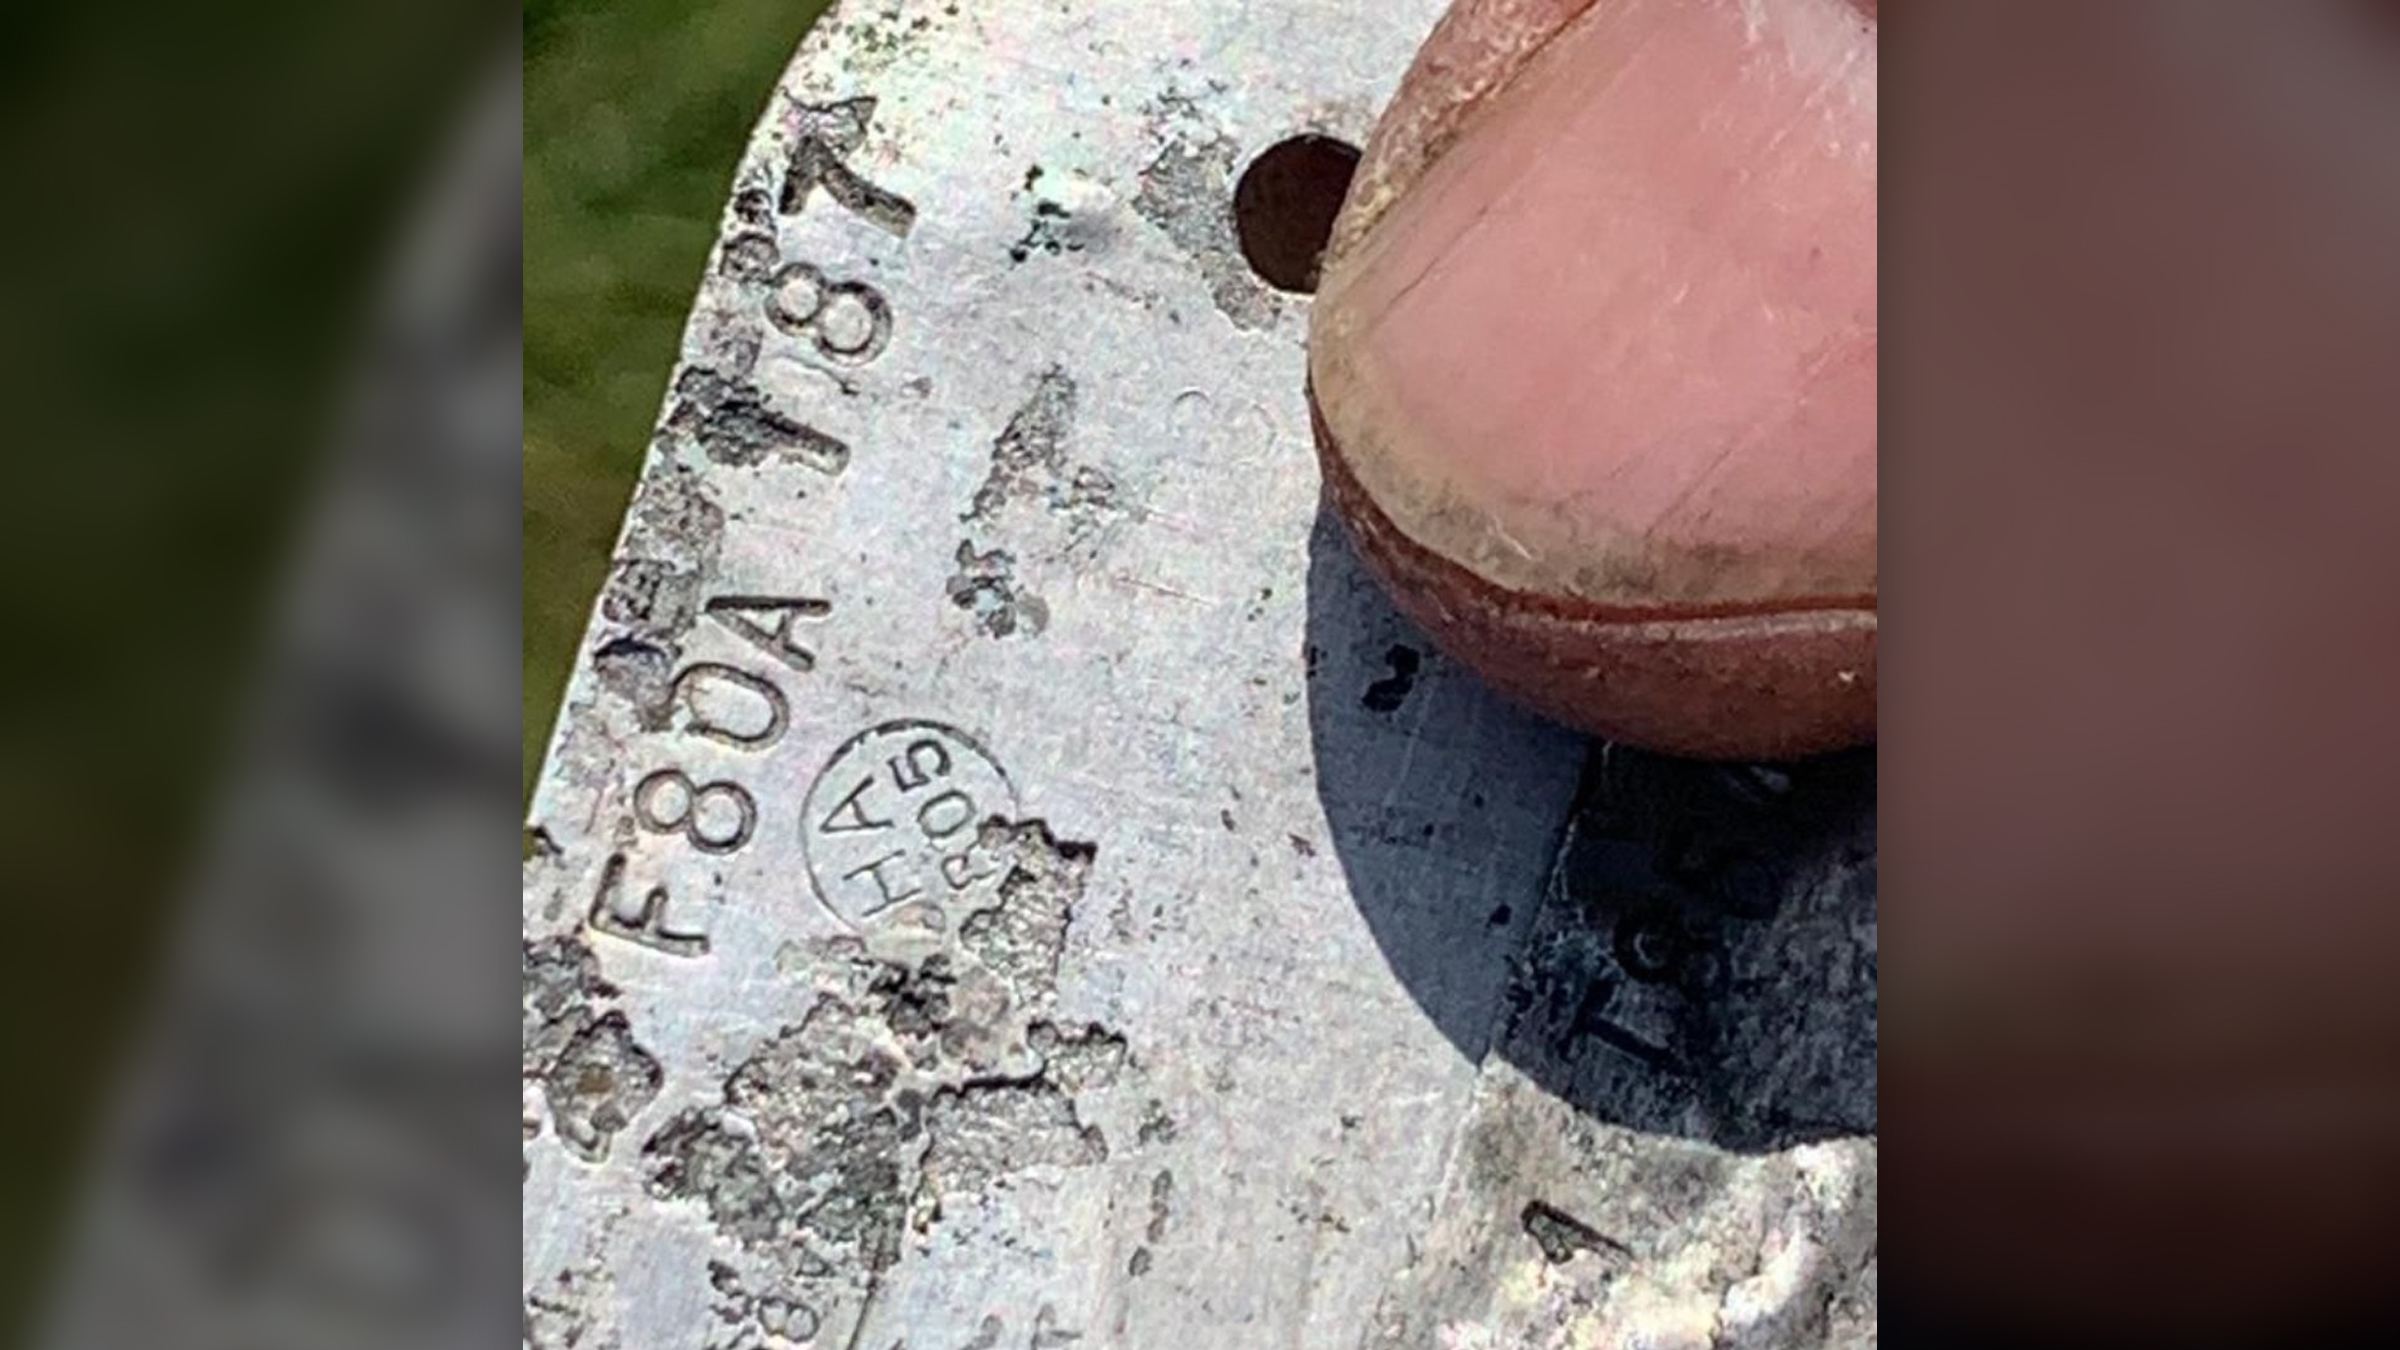 We see a person's thumb over a metal piece that has imprinted numbers and letters.